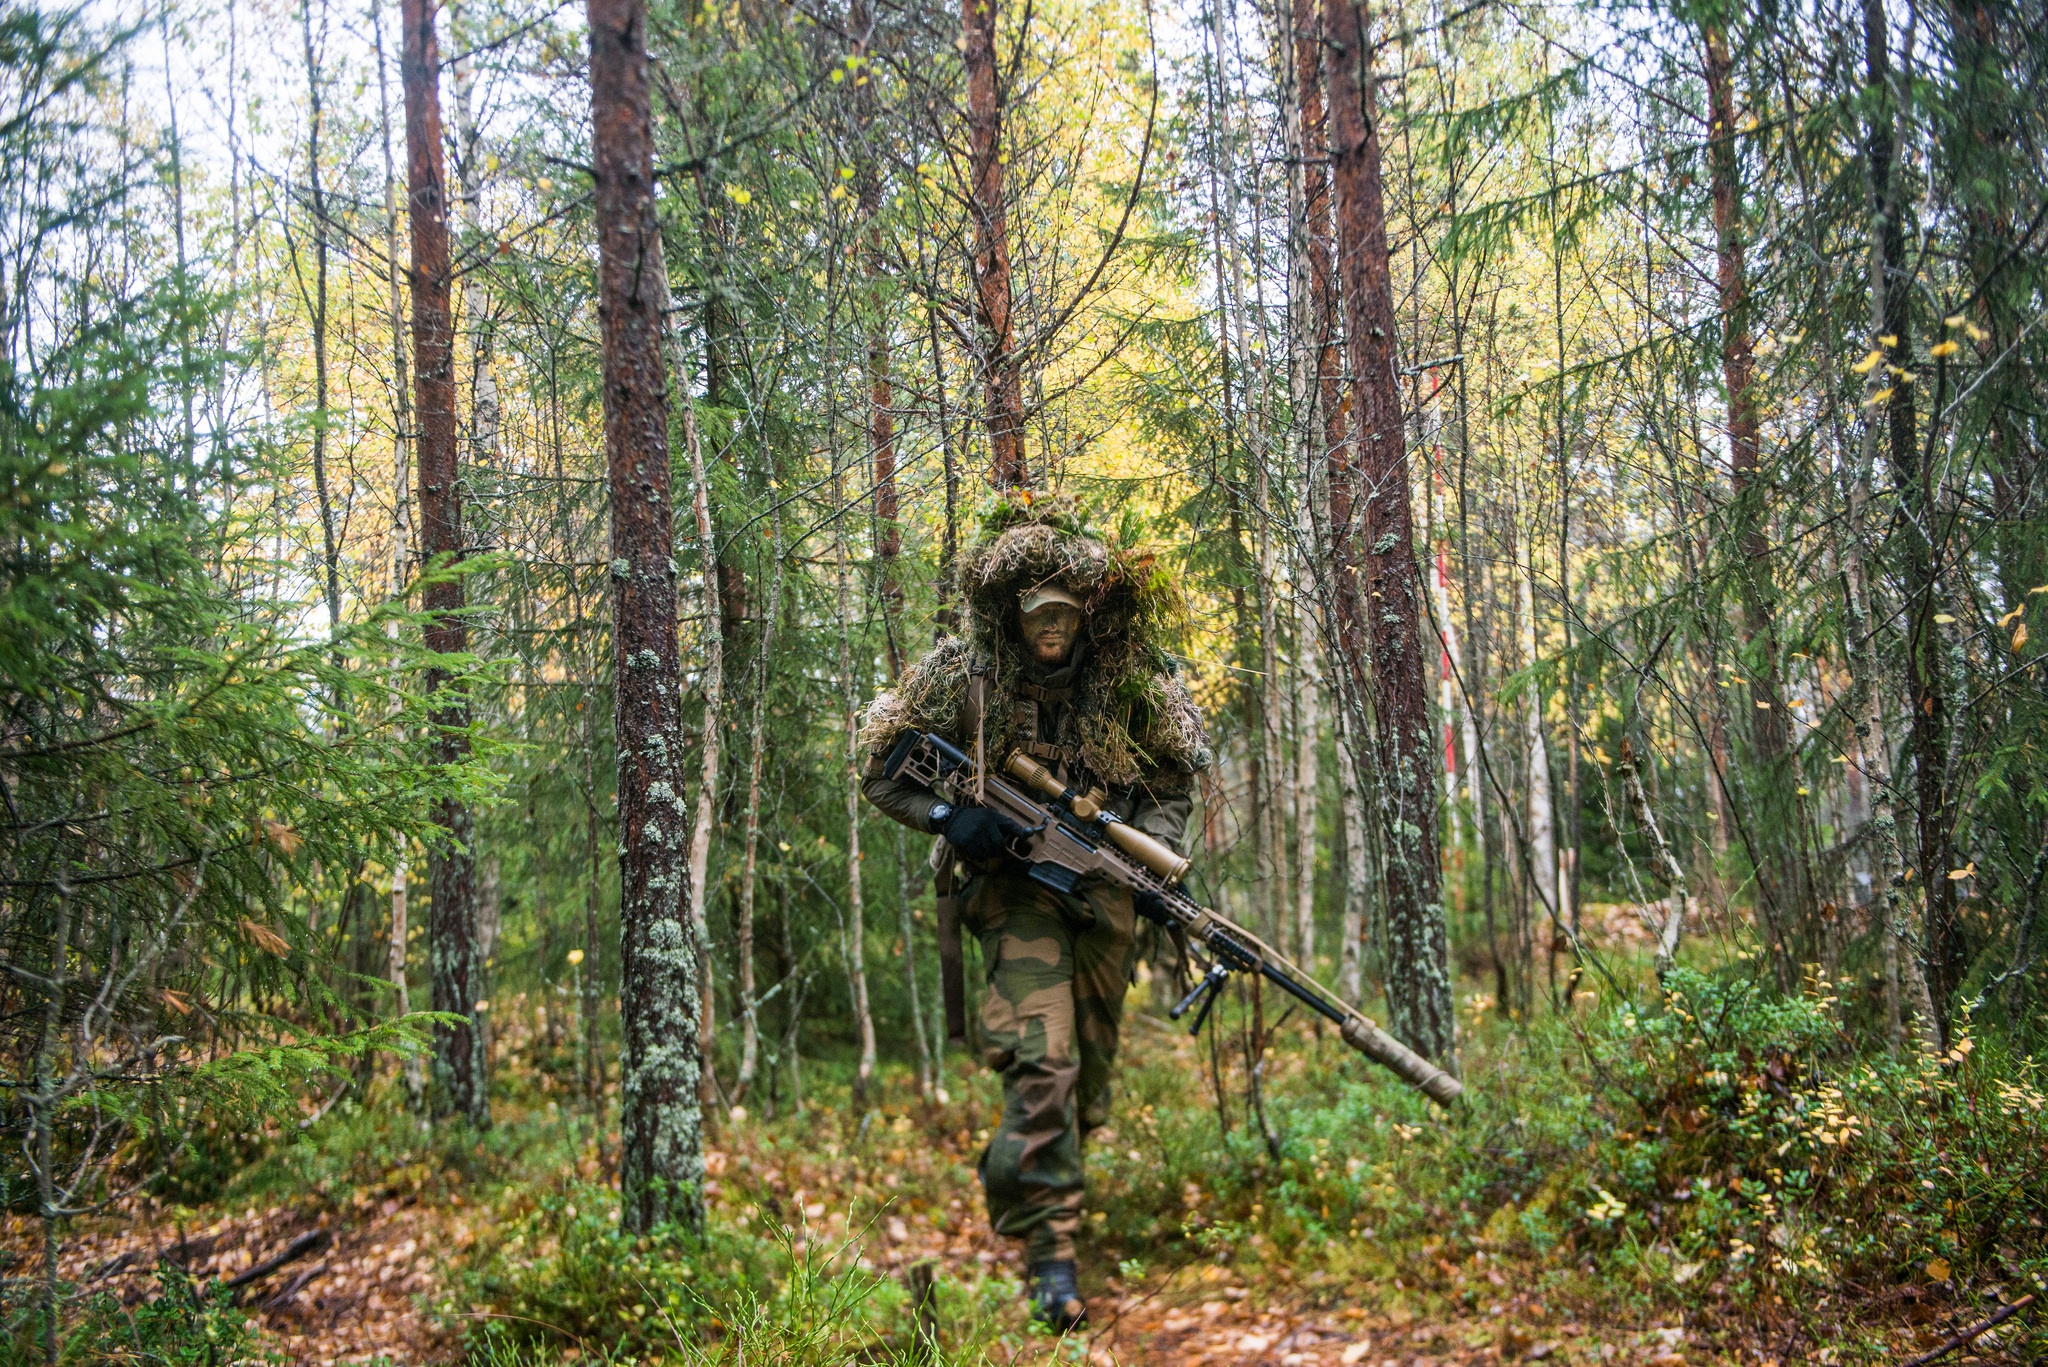 Forest Camouflage Sniper Rifle 2048x1367